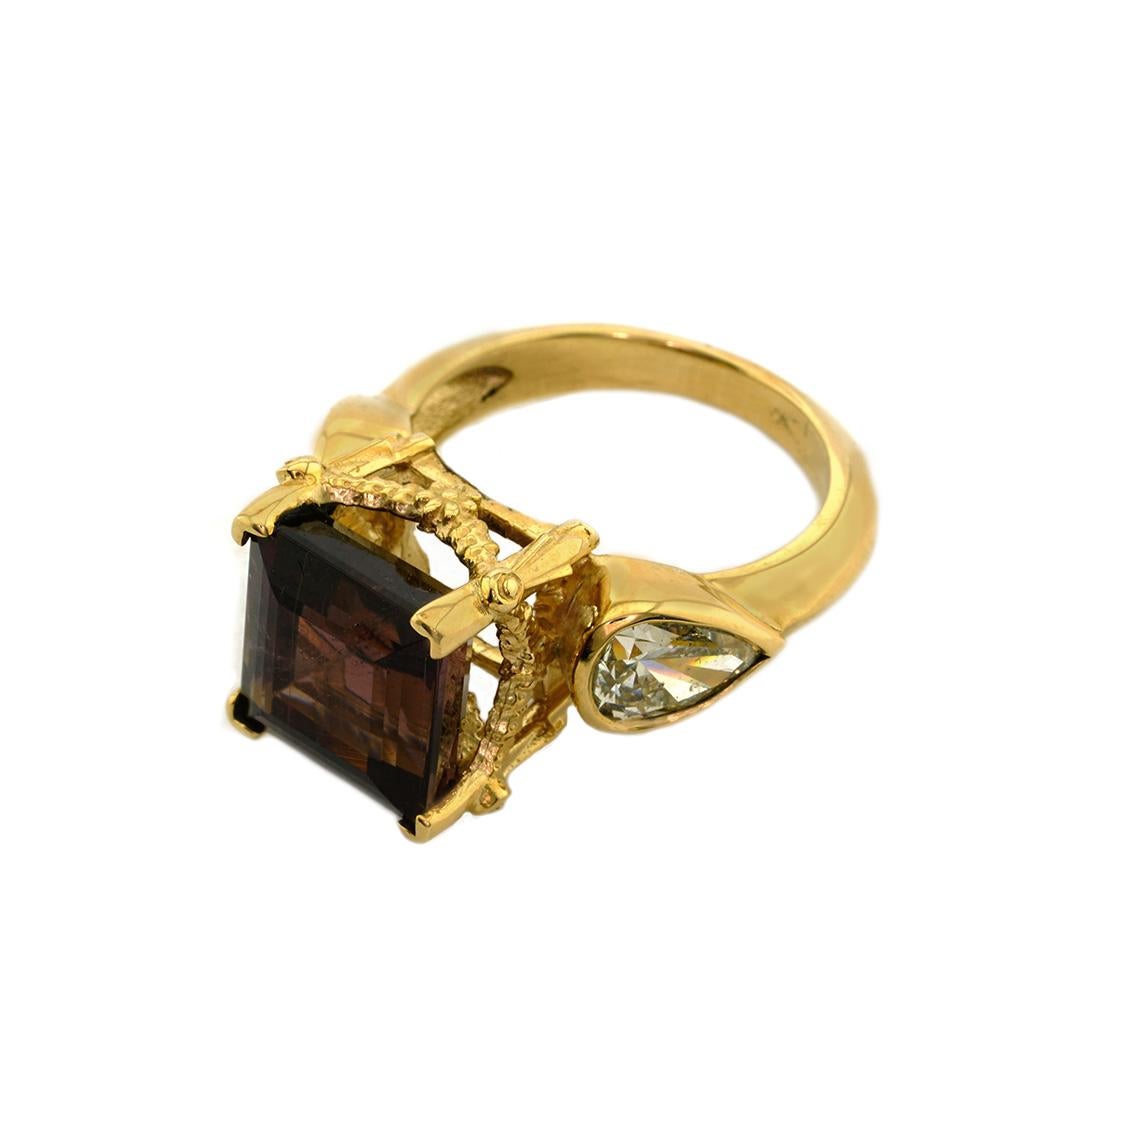 William Llewellyn Griffiths Diamonds and Tourmaline Romantic Rites Ring (Carréeschliff)